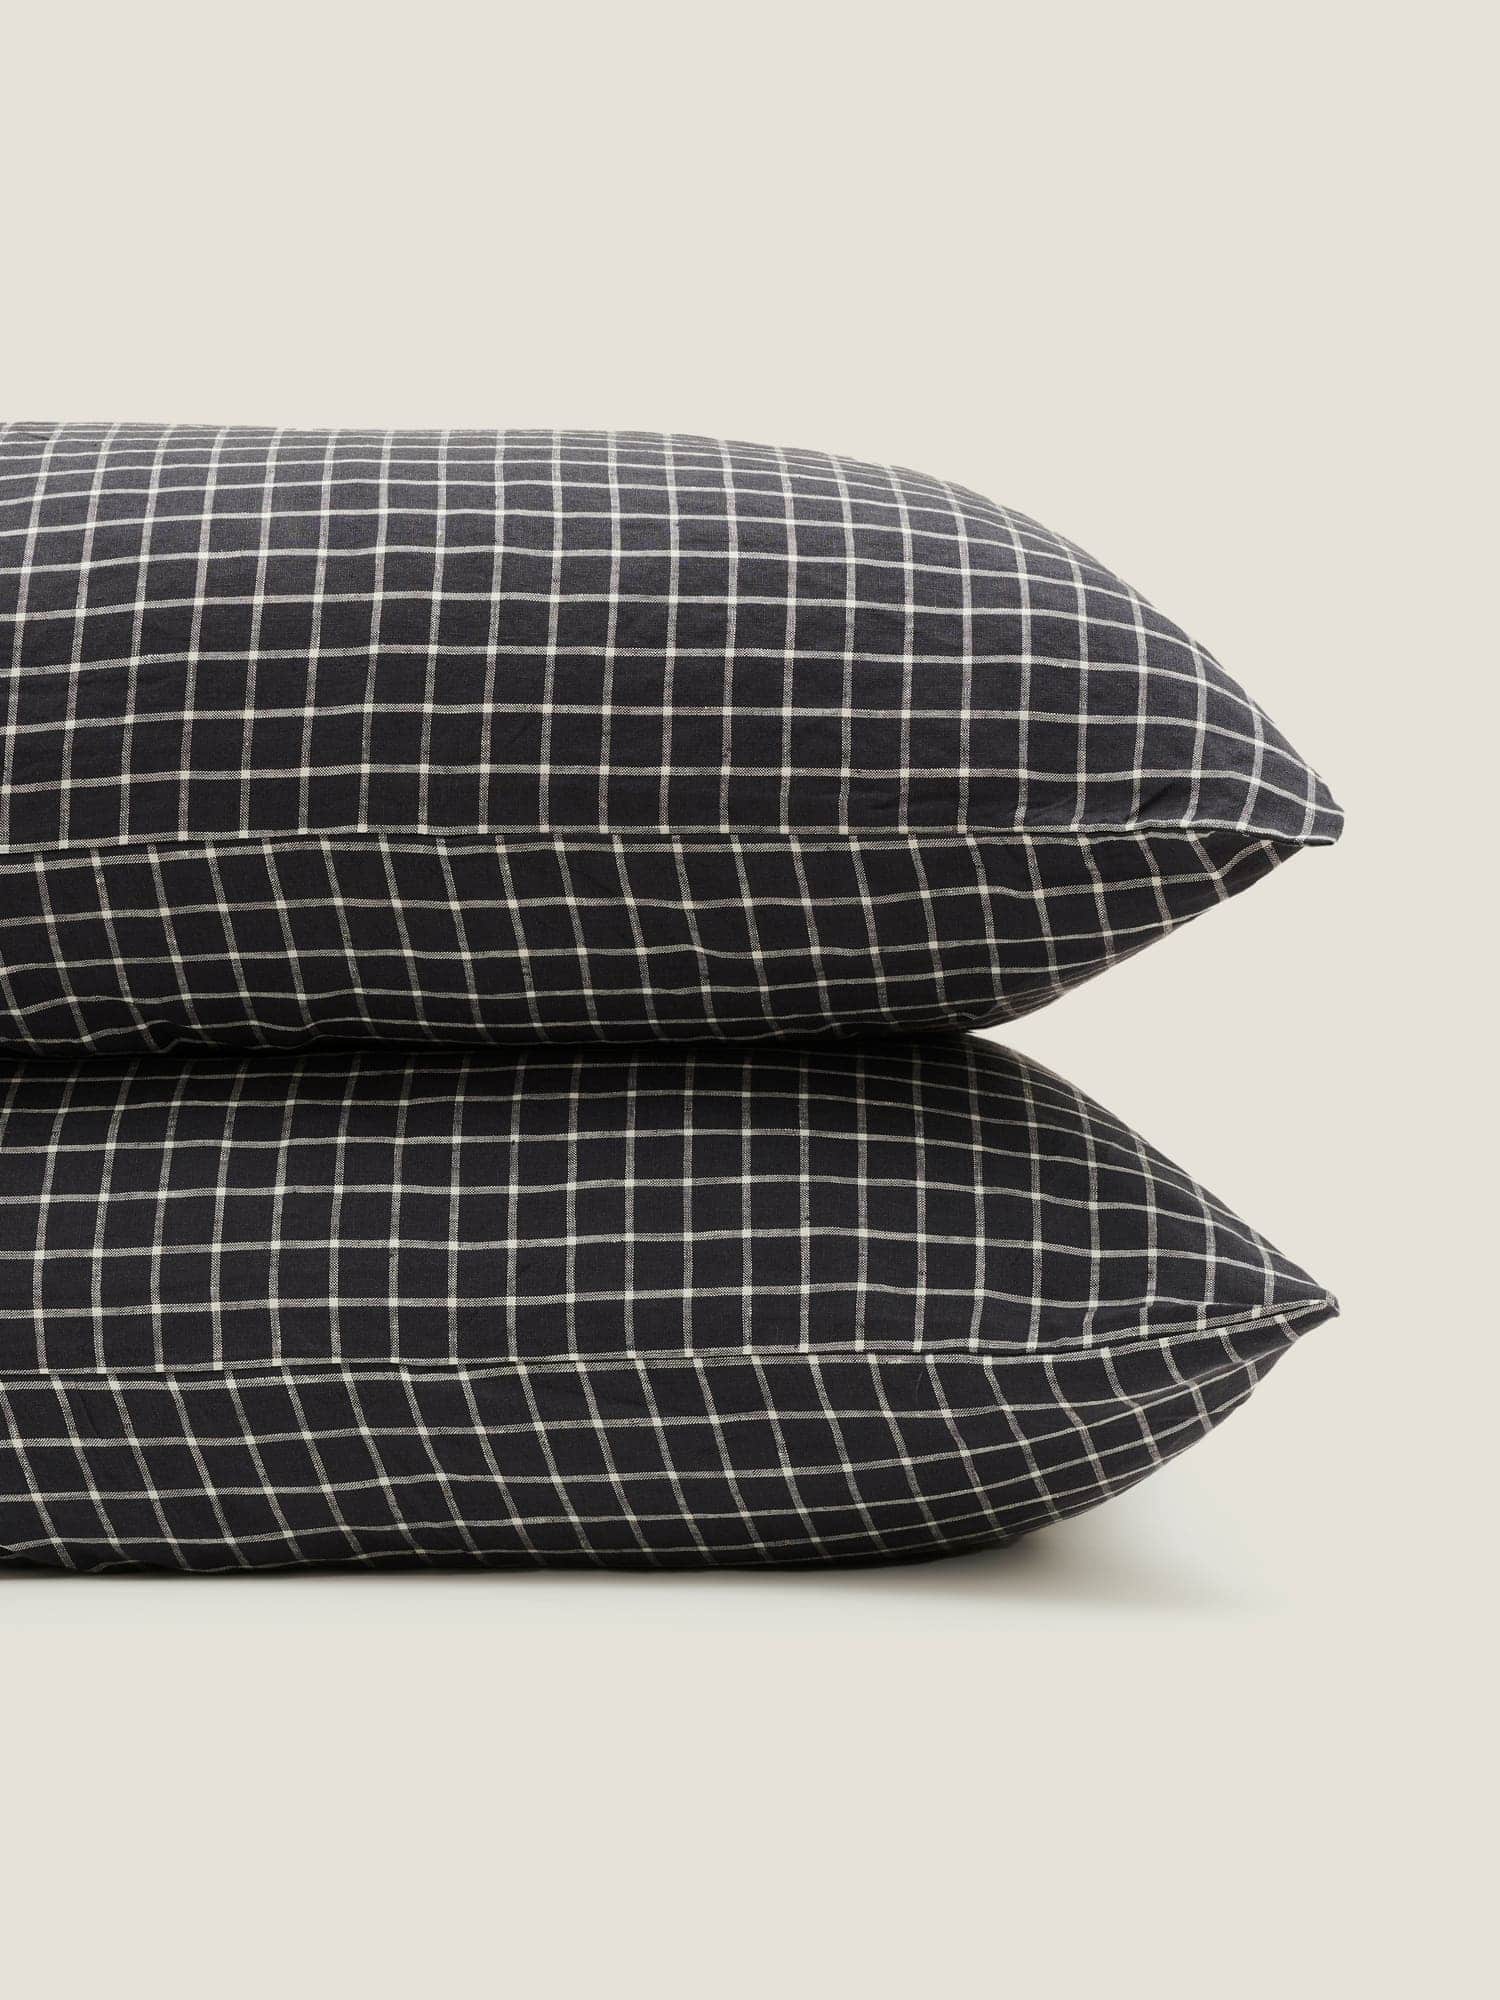 standard pillowcases in french navy